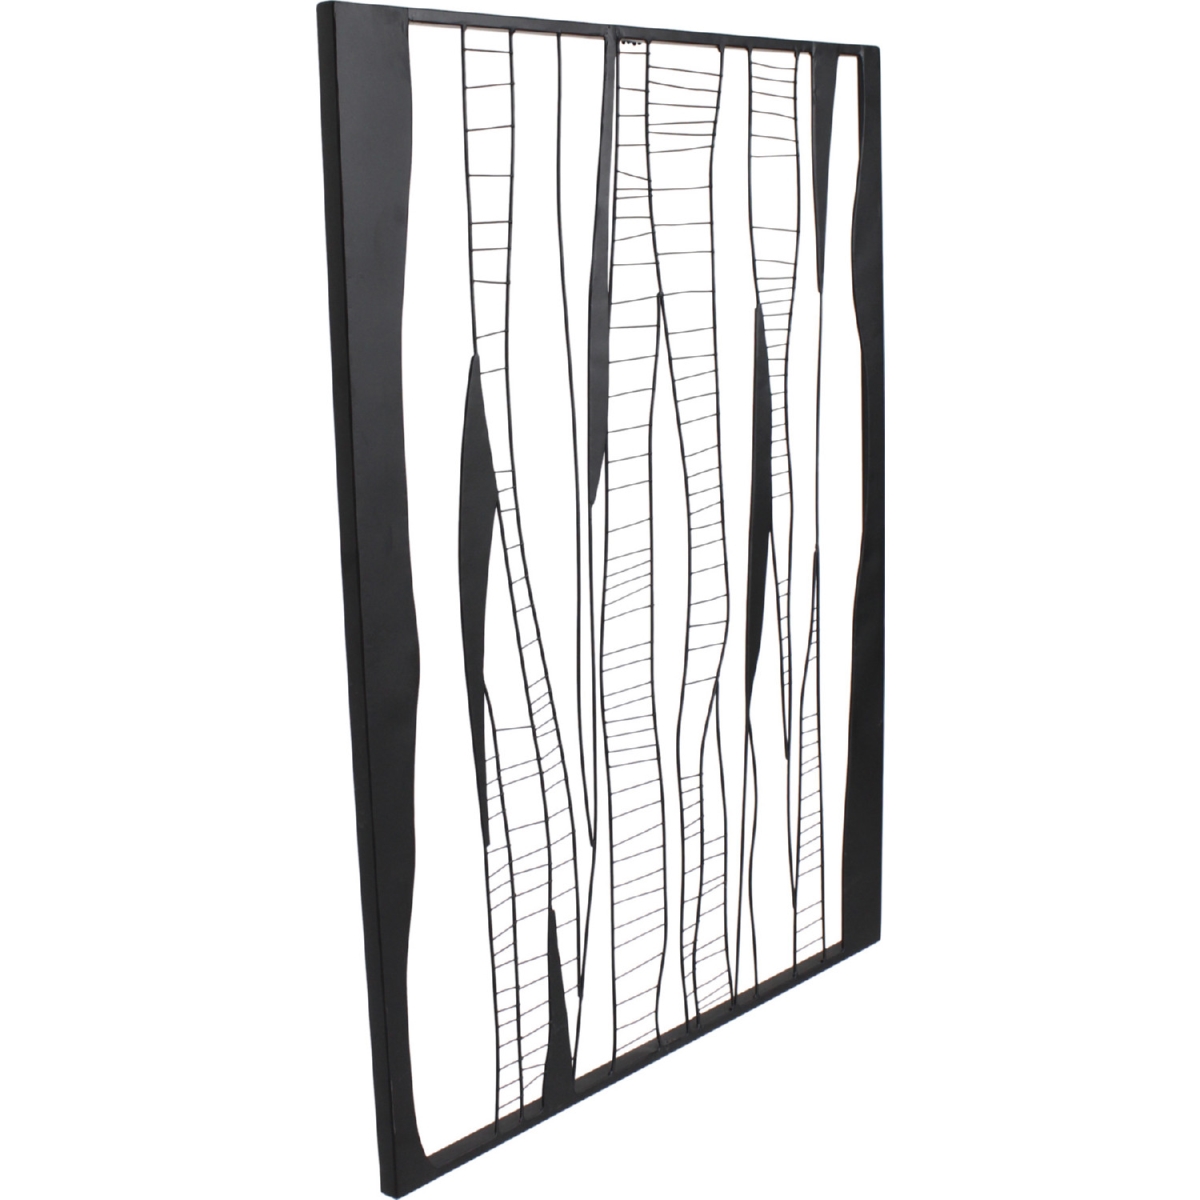 Ty-1032-02 Metal Waves 1 Wall Decor Sculptures - Black, 33.5 X 25 X 1 In.